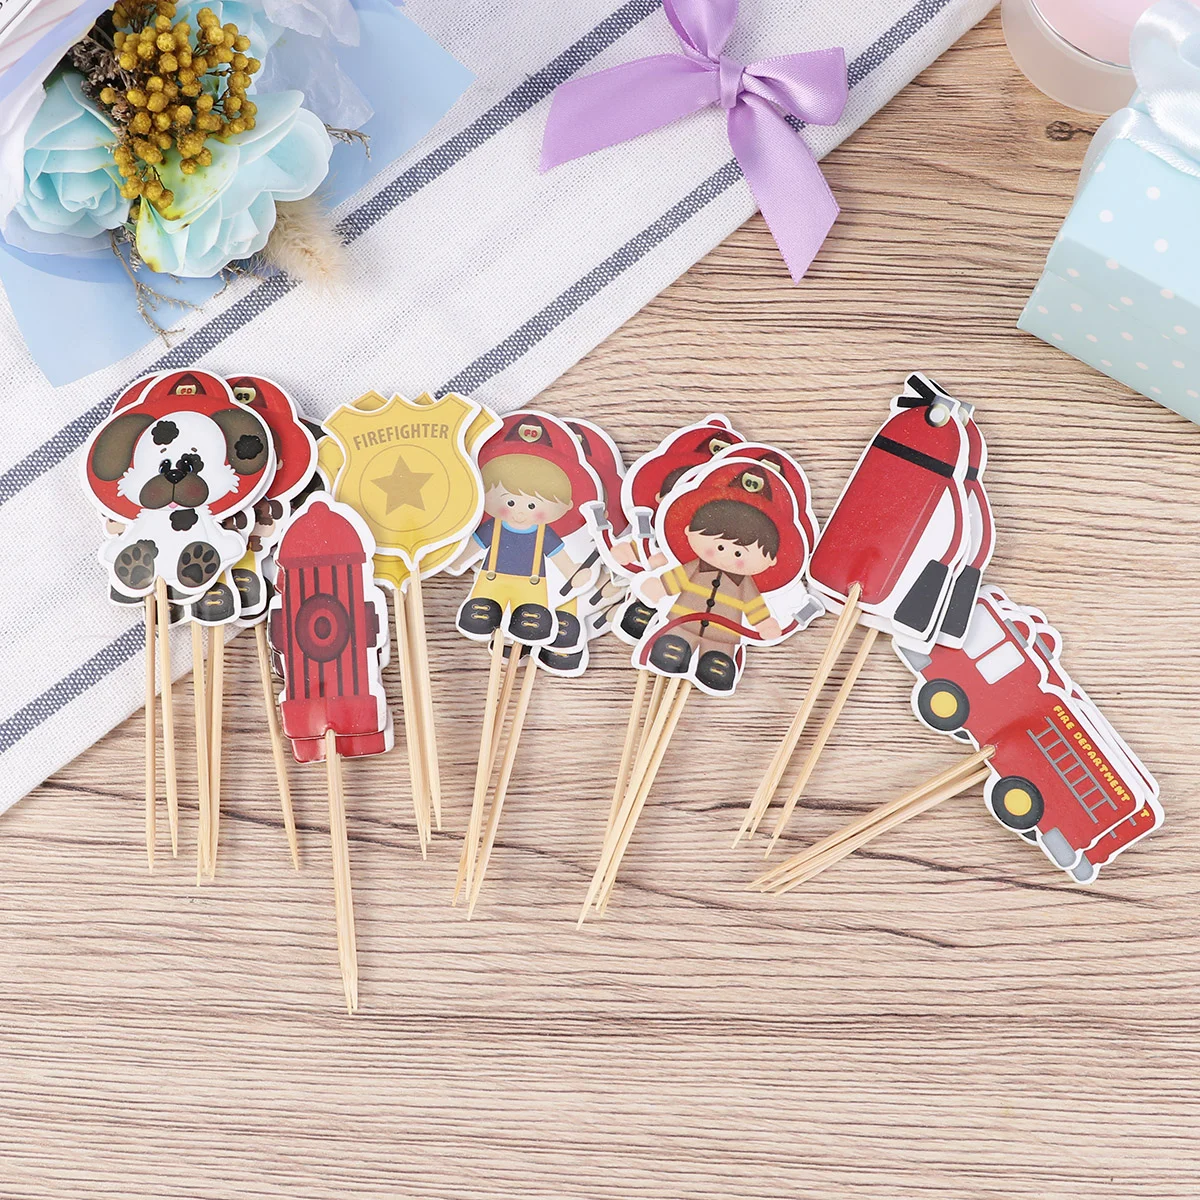 

24 Pcs Cocktail Drink Picks Pirate Gifts Fireman Pirate Decor Truck Firefighter Cupcake Toppers